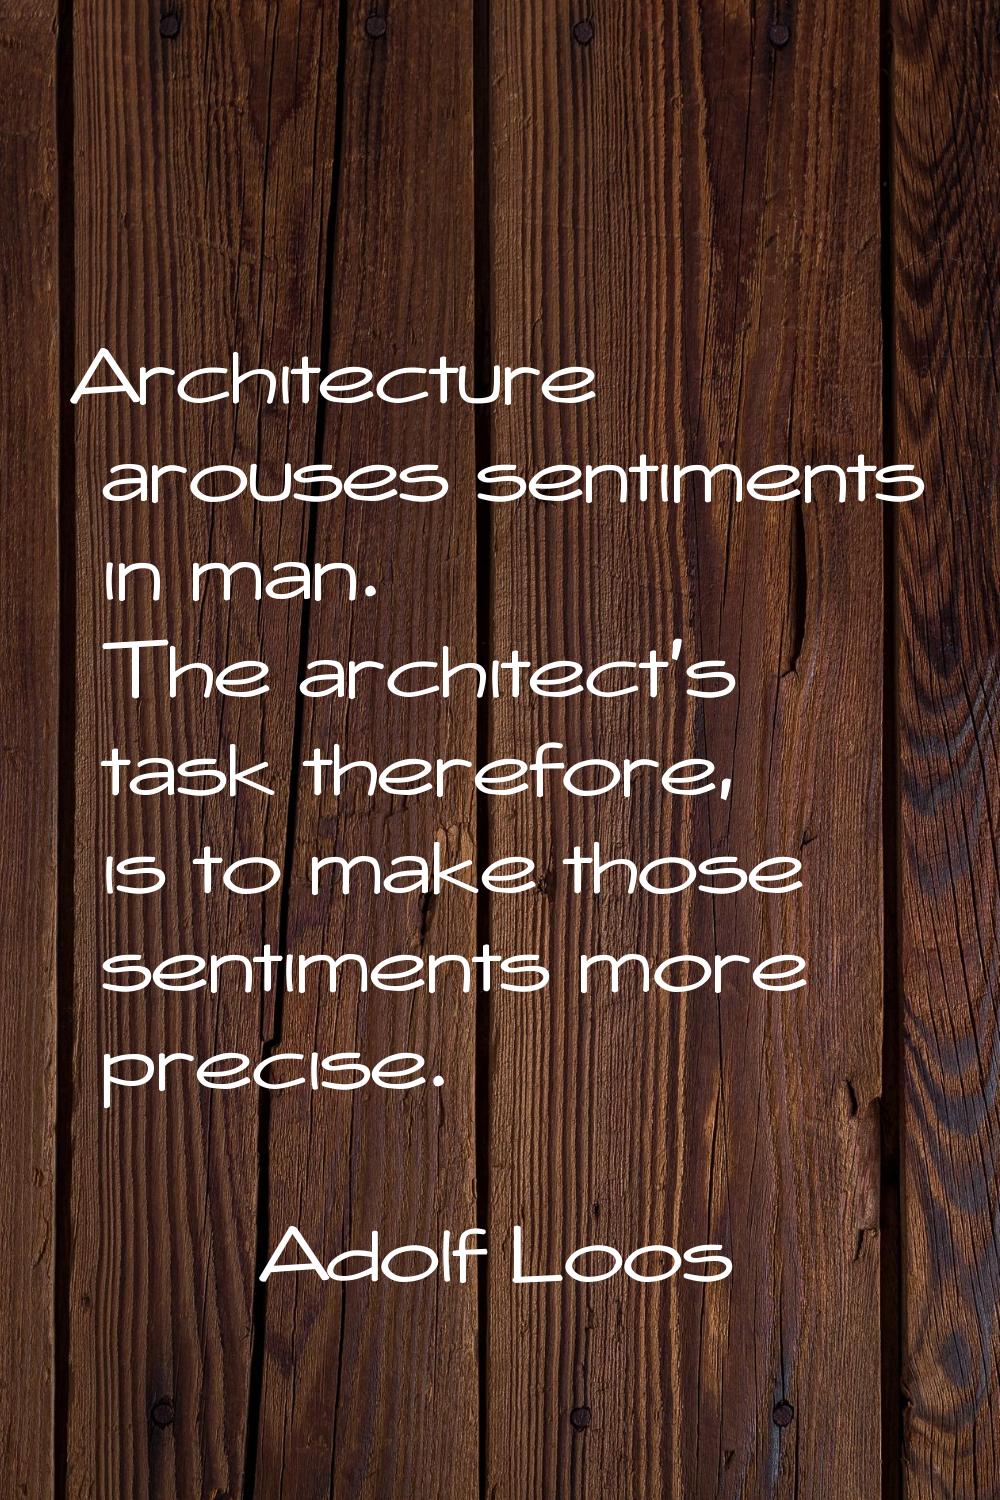 Architecture arouses sentiments in man. The architect's task therefore, is to make those sentiments